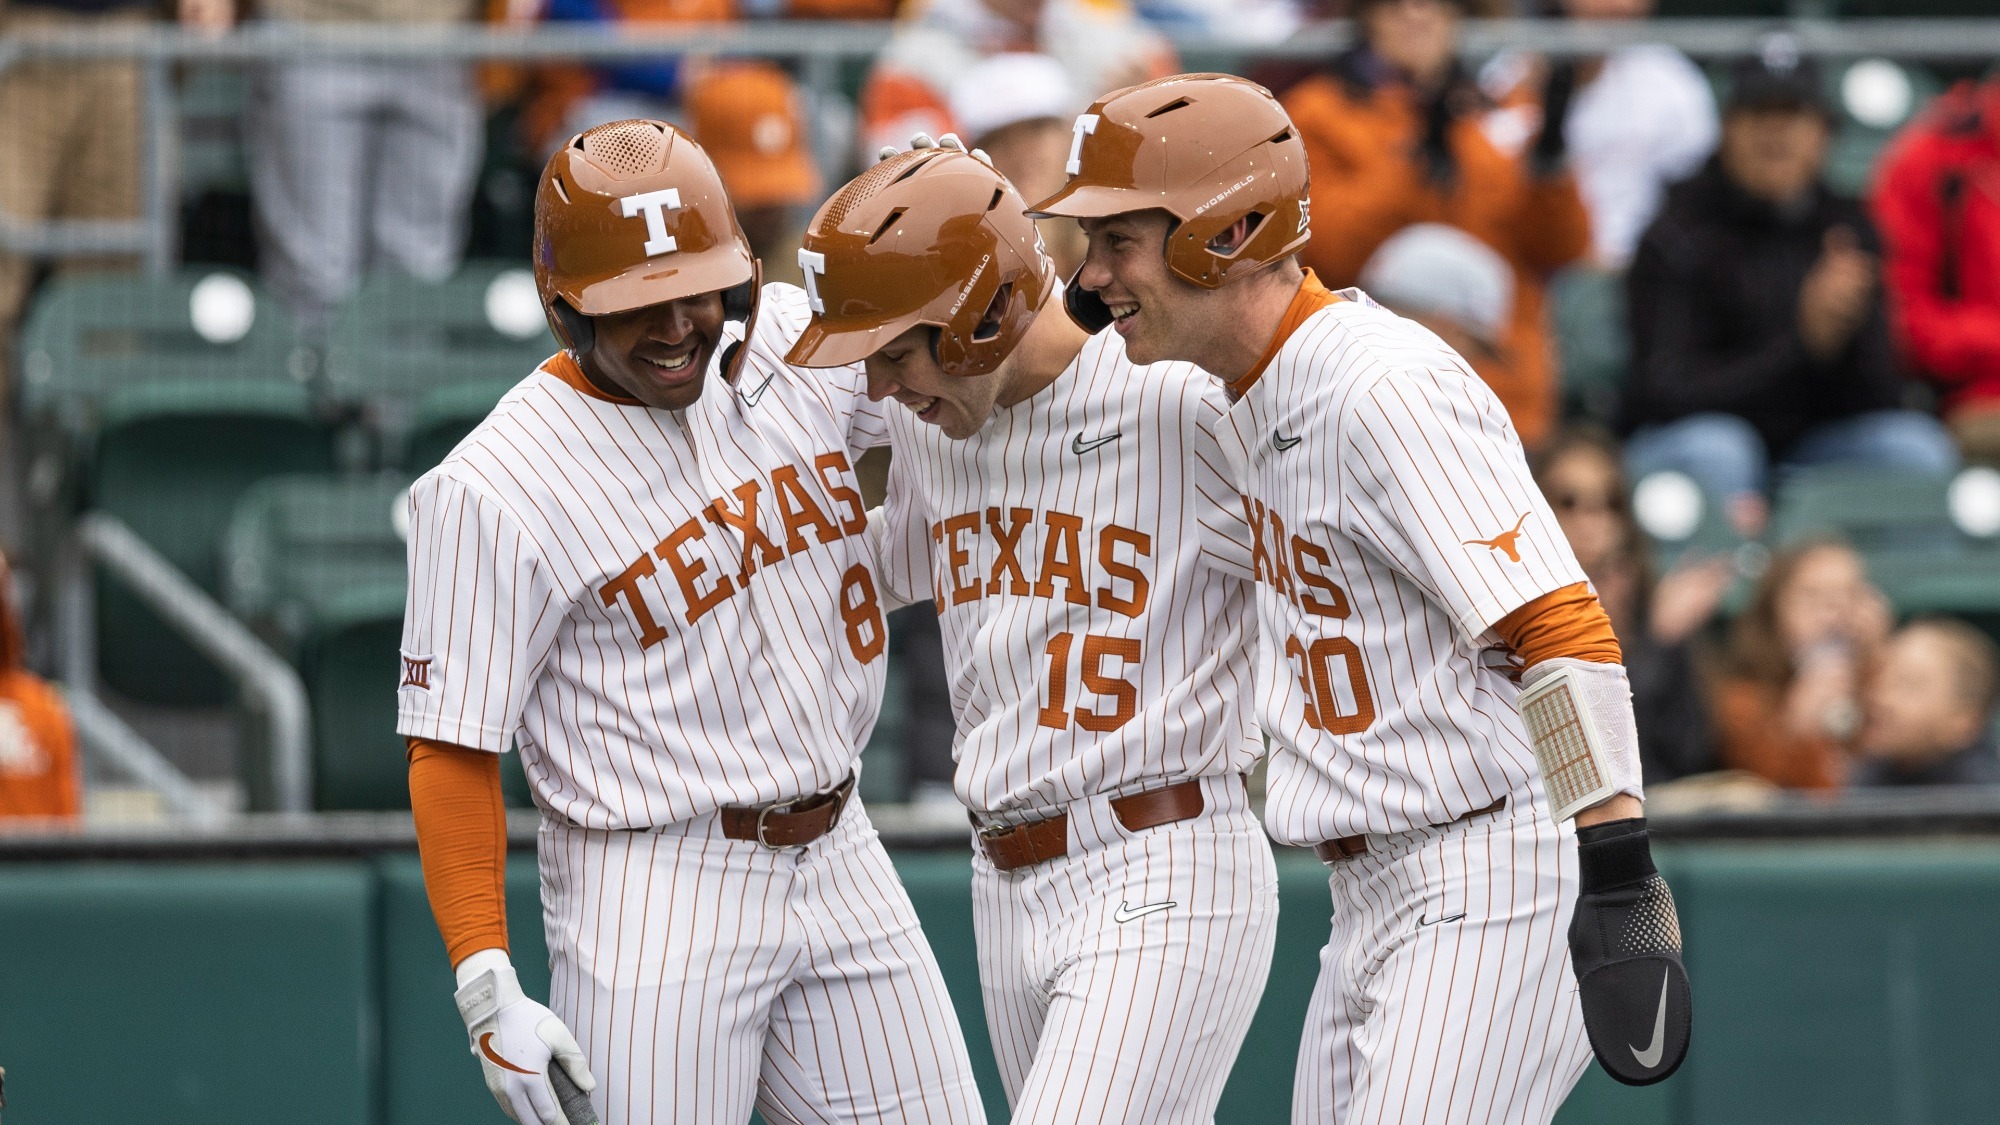 Watch Texas Longhorns at Texas AandM Aggies in College Baseball - How to Watch and Stream Major League and College Sports